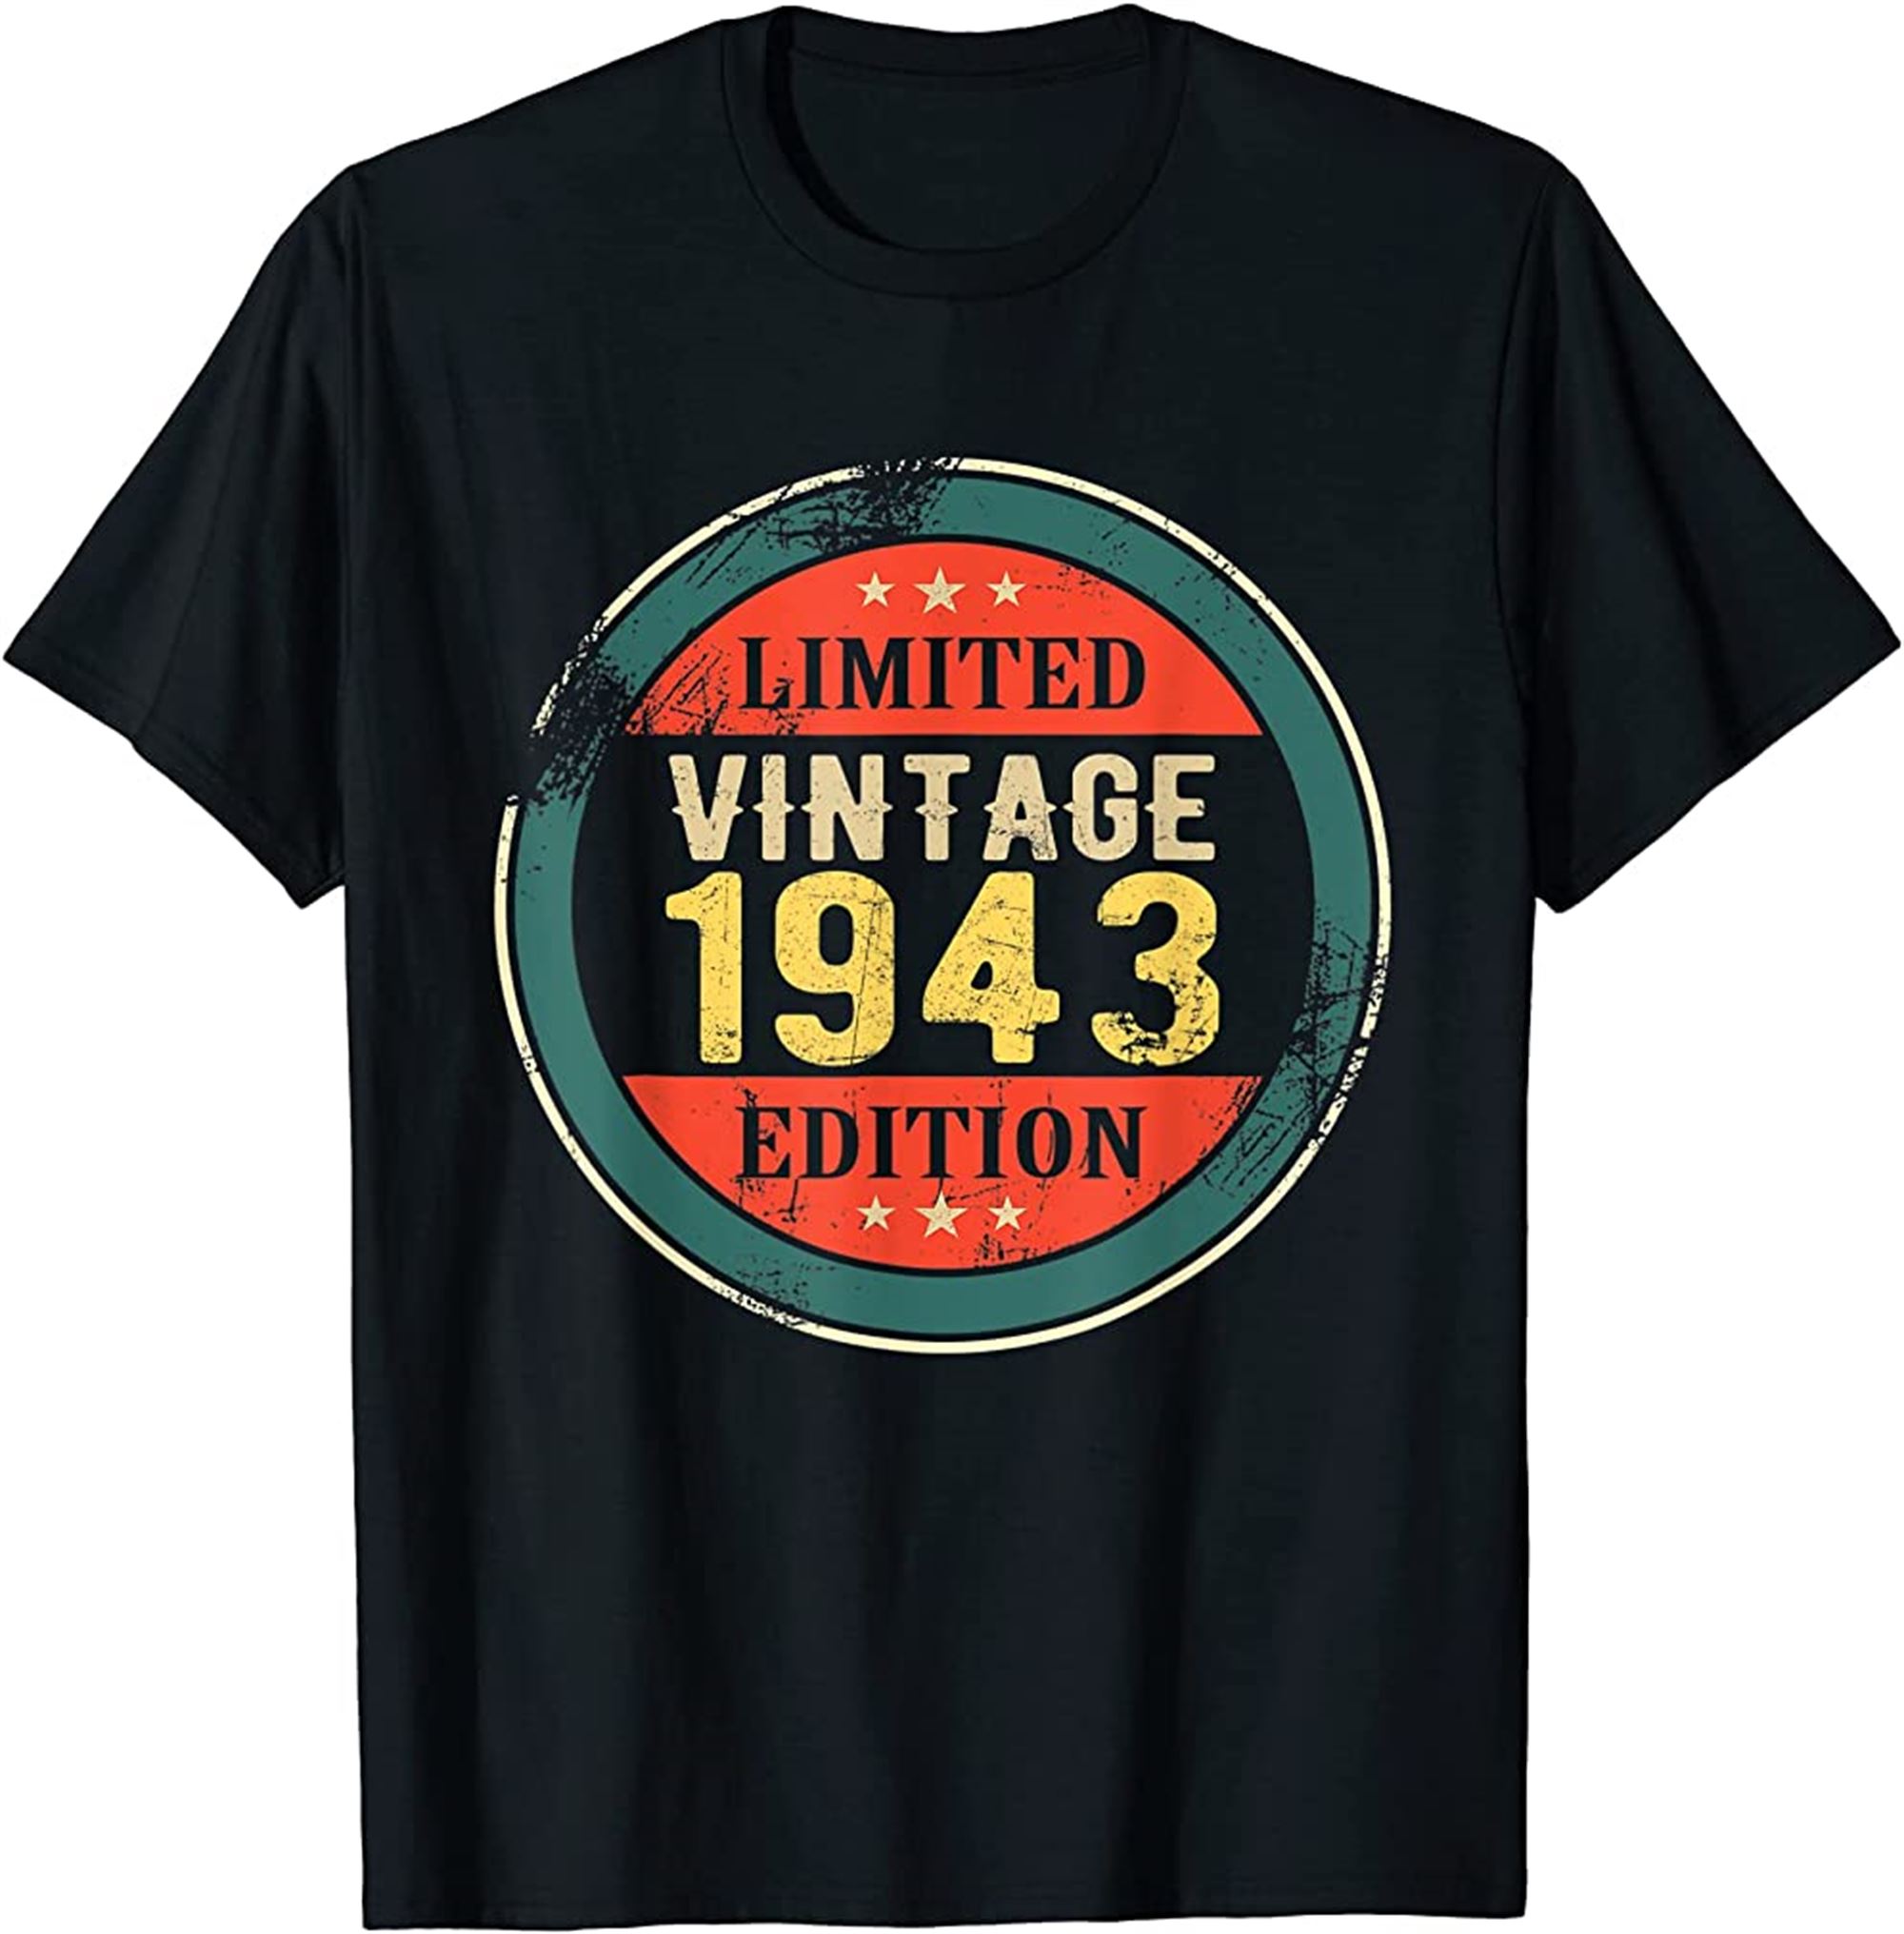 79 Year Old Gifts Vintage 1943 Limited Edition 79th Bday T-shirt Size Up To 5xl